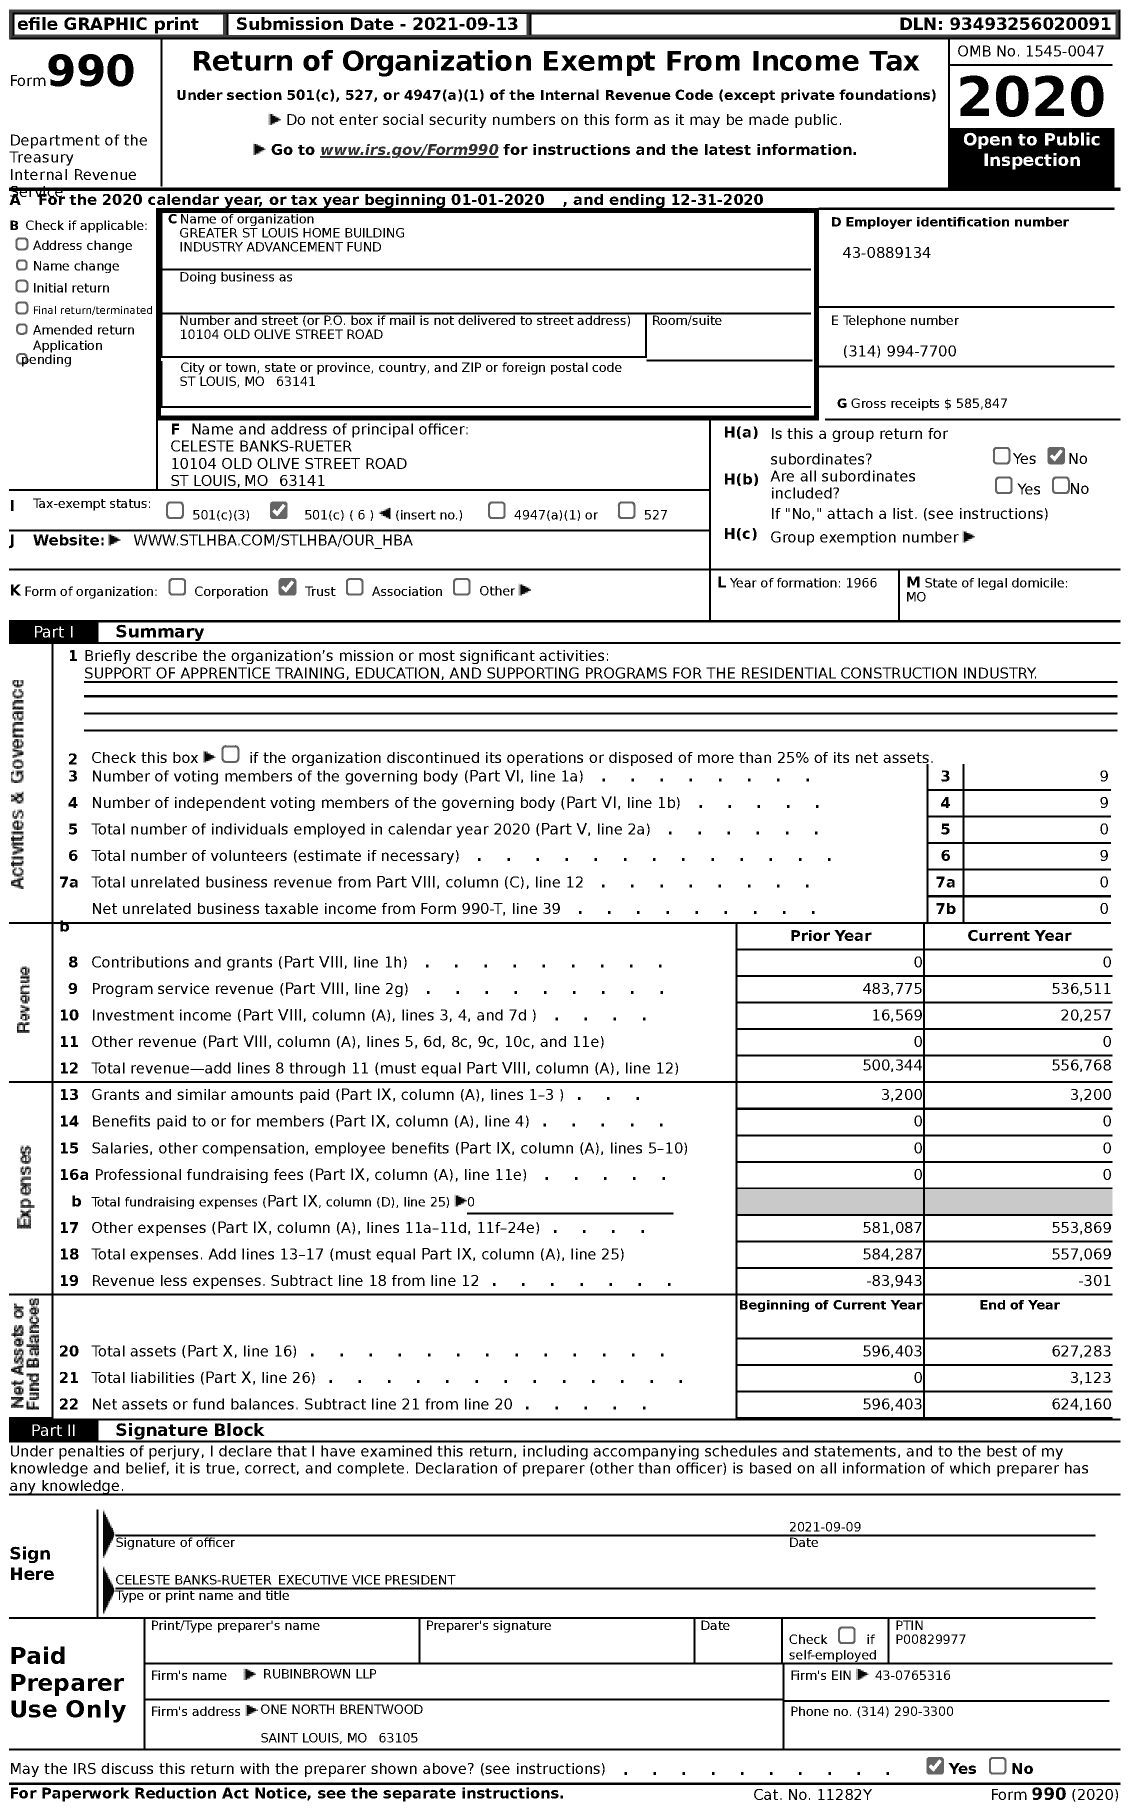 Image of first page of 2020 Form 990 for Greater St Louis Home Building Industry Advancement Fund